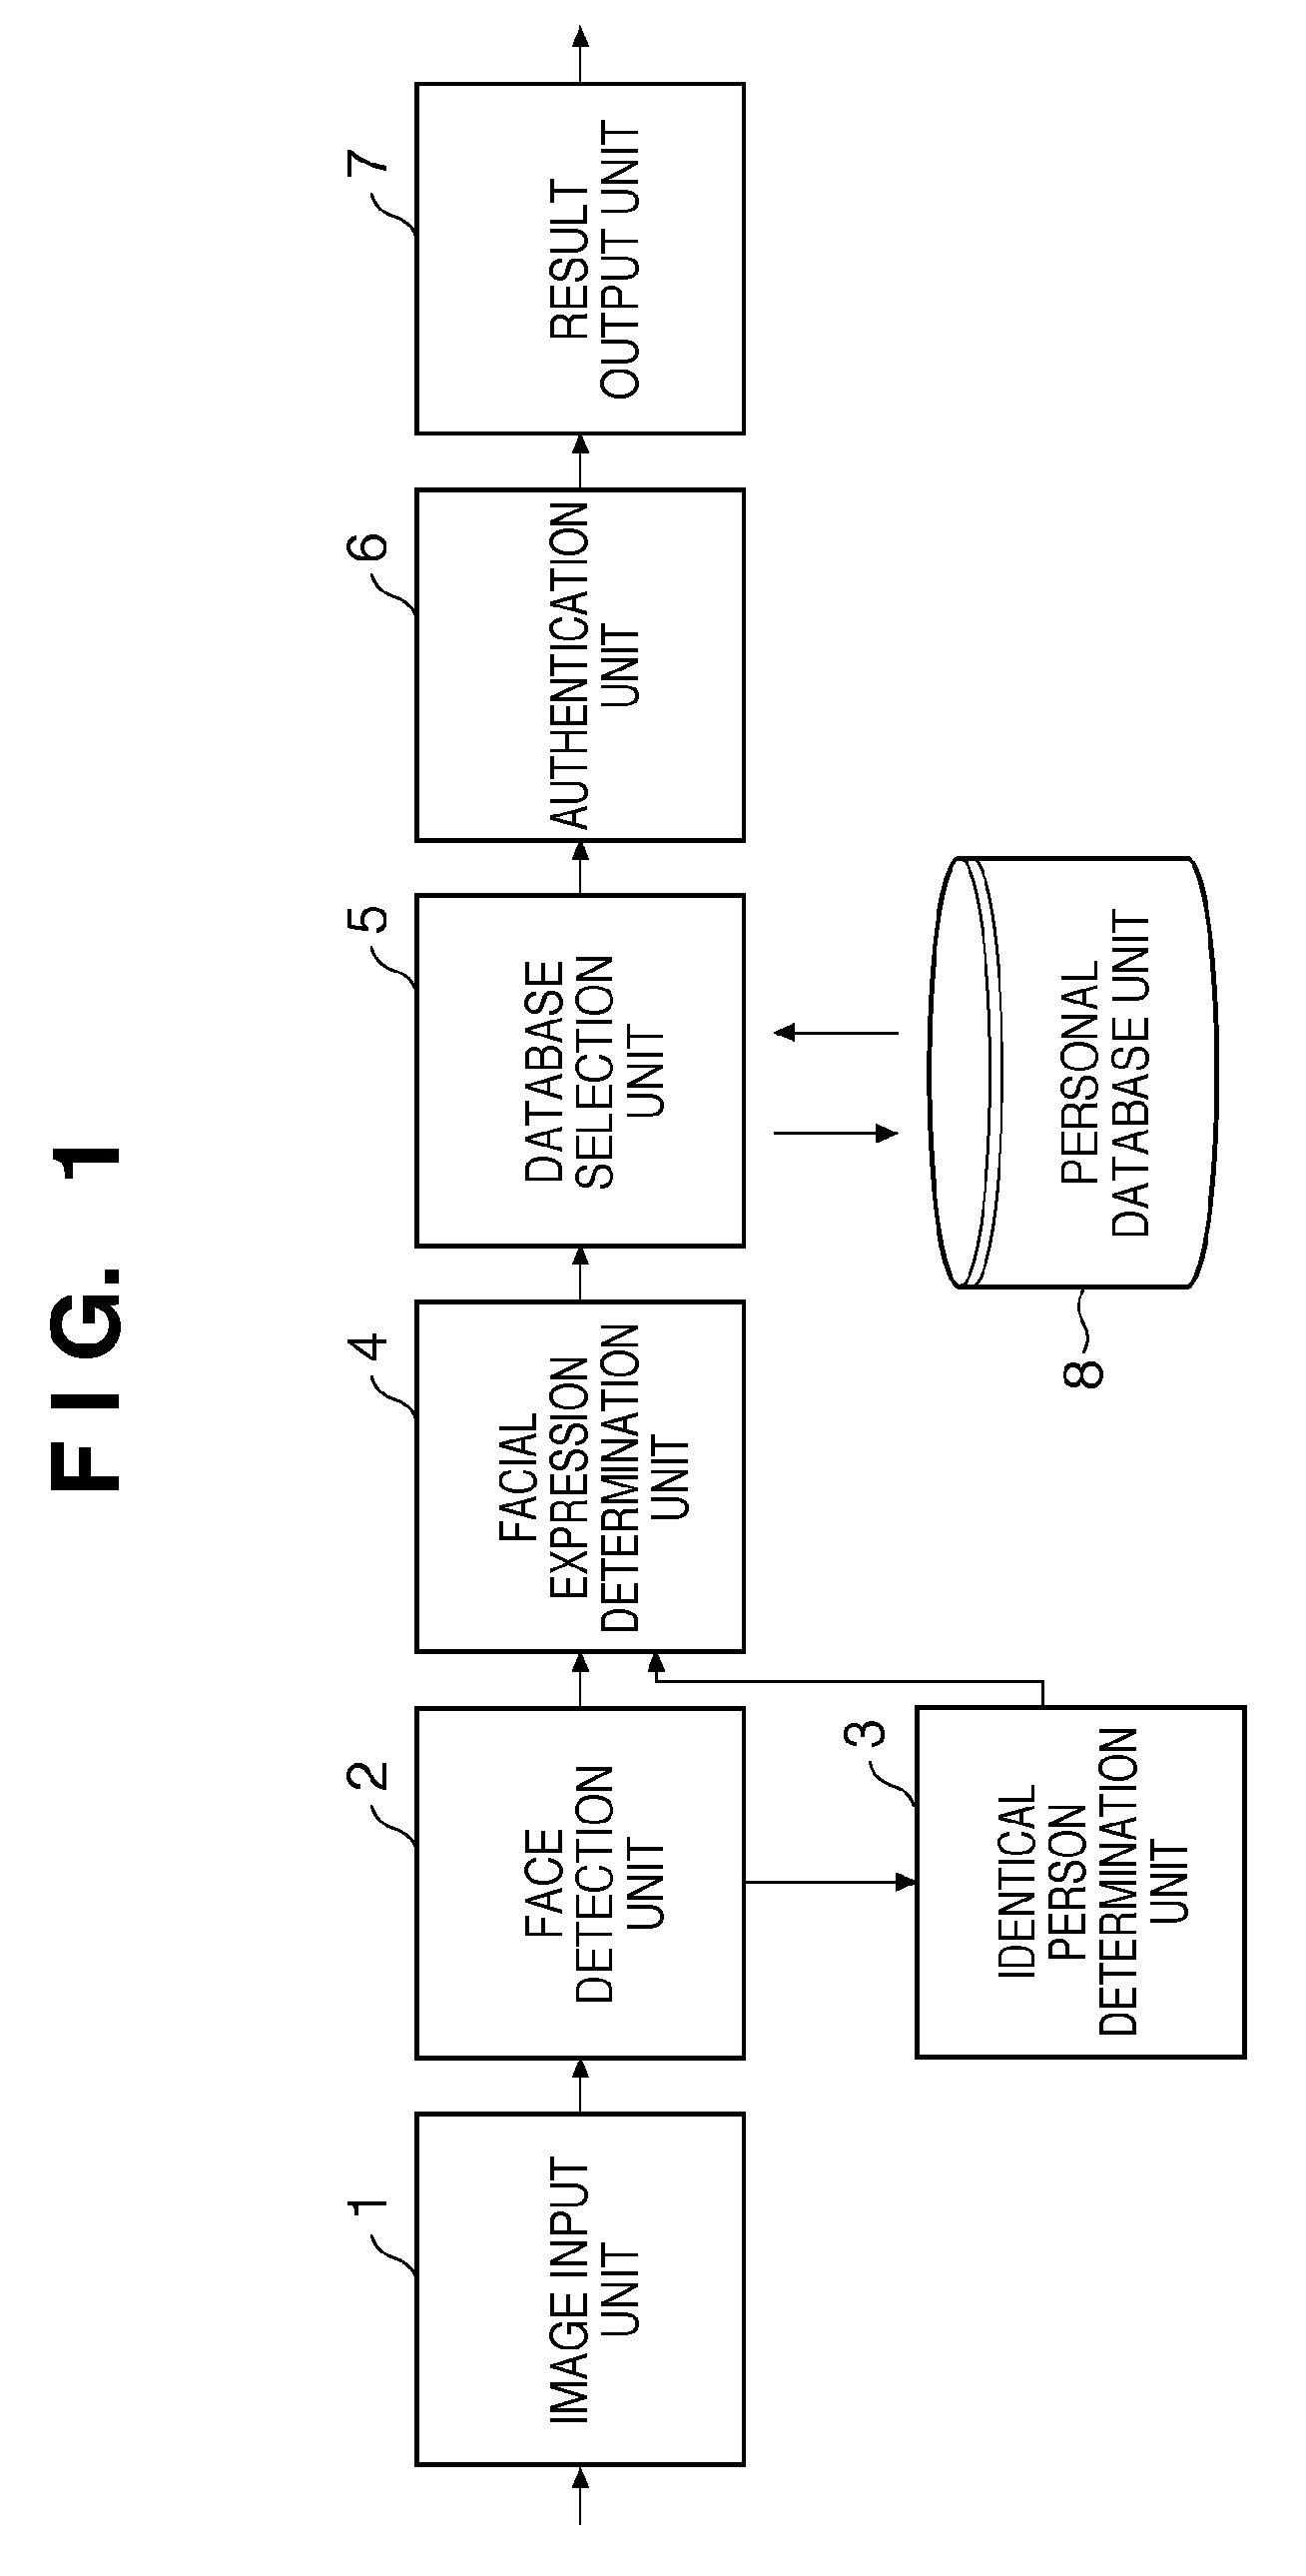 Personal authentication apparatus and personal authentication method